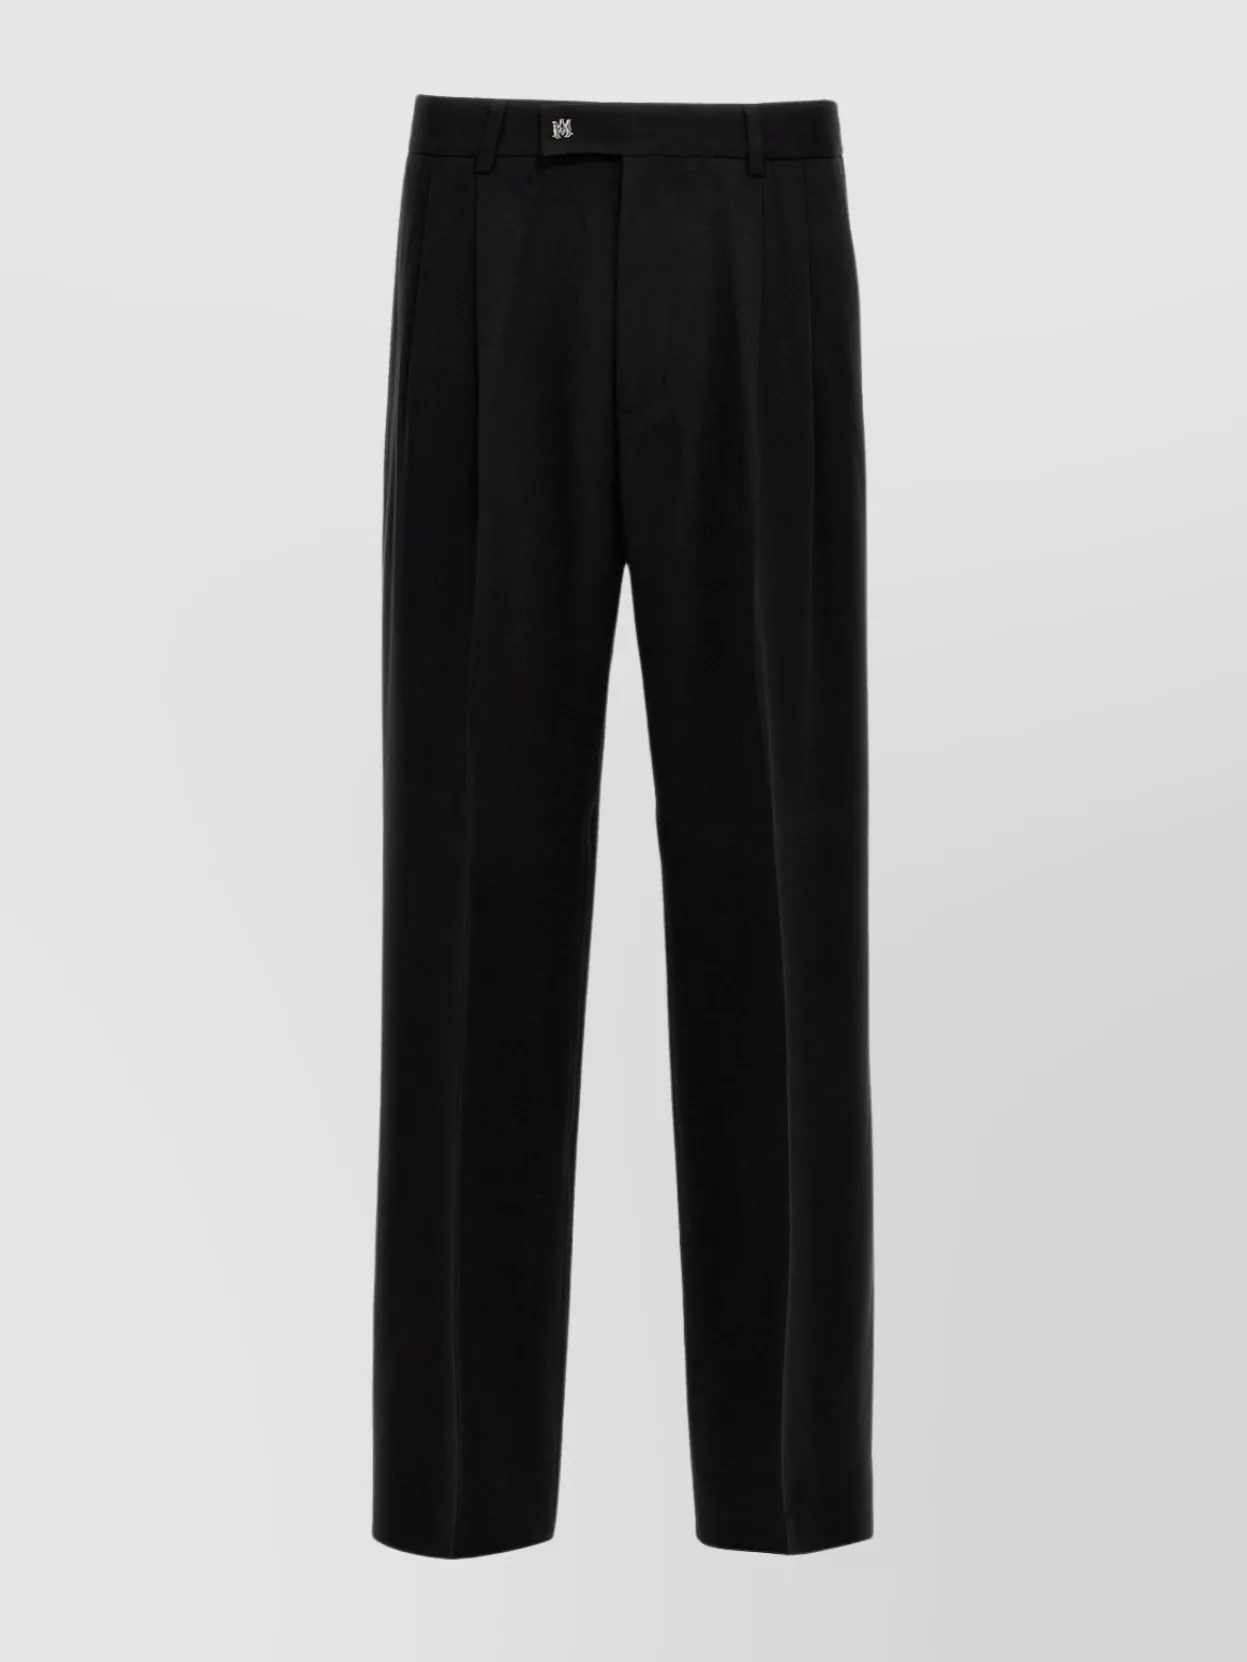 Amiri Trousers Featuring Wide Leg And Belt Loops In Black